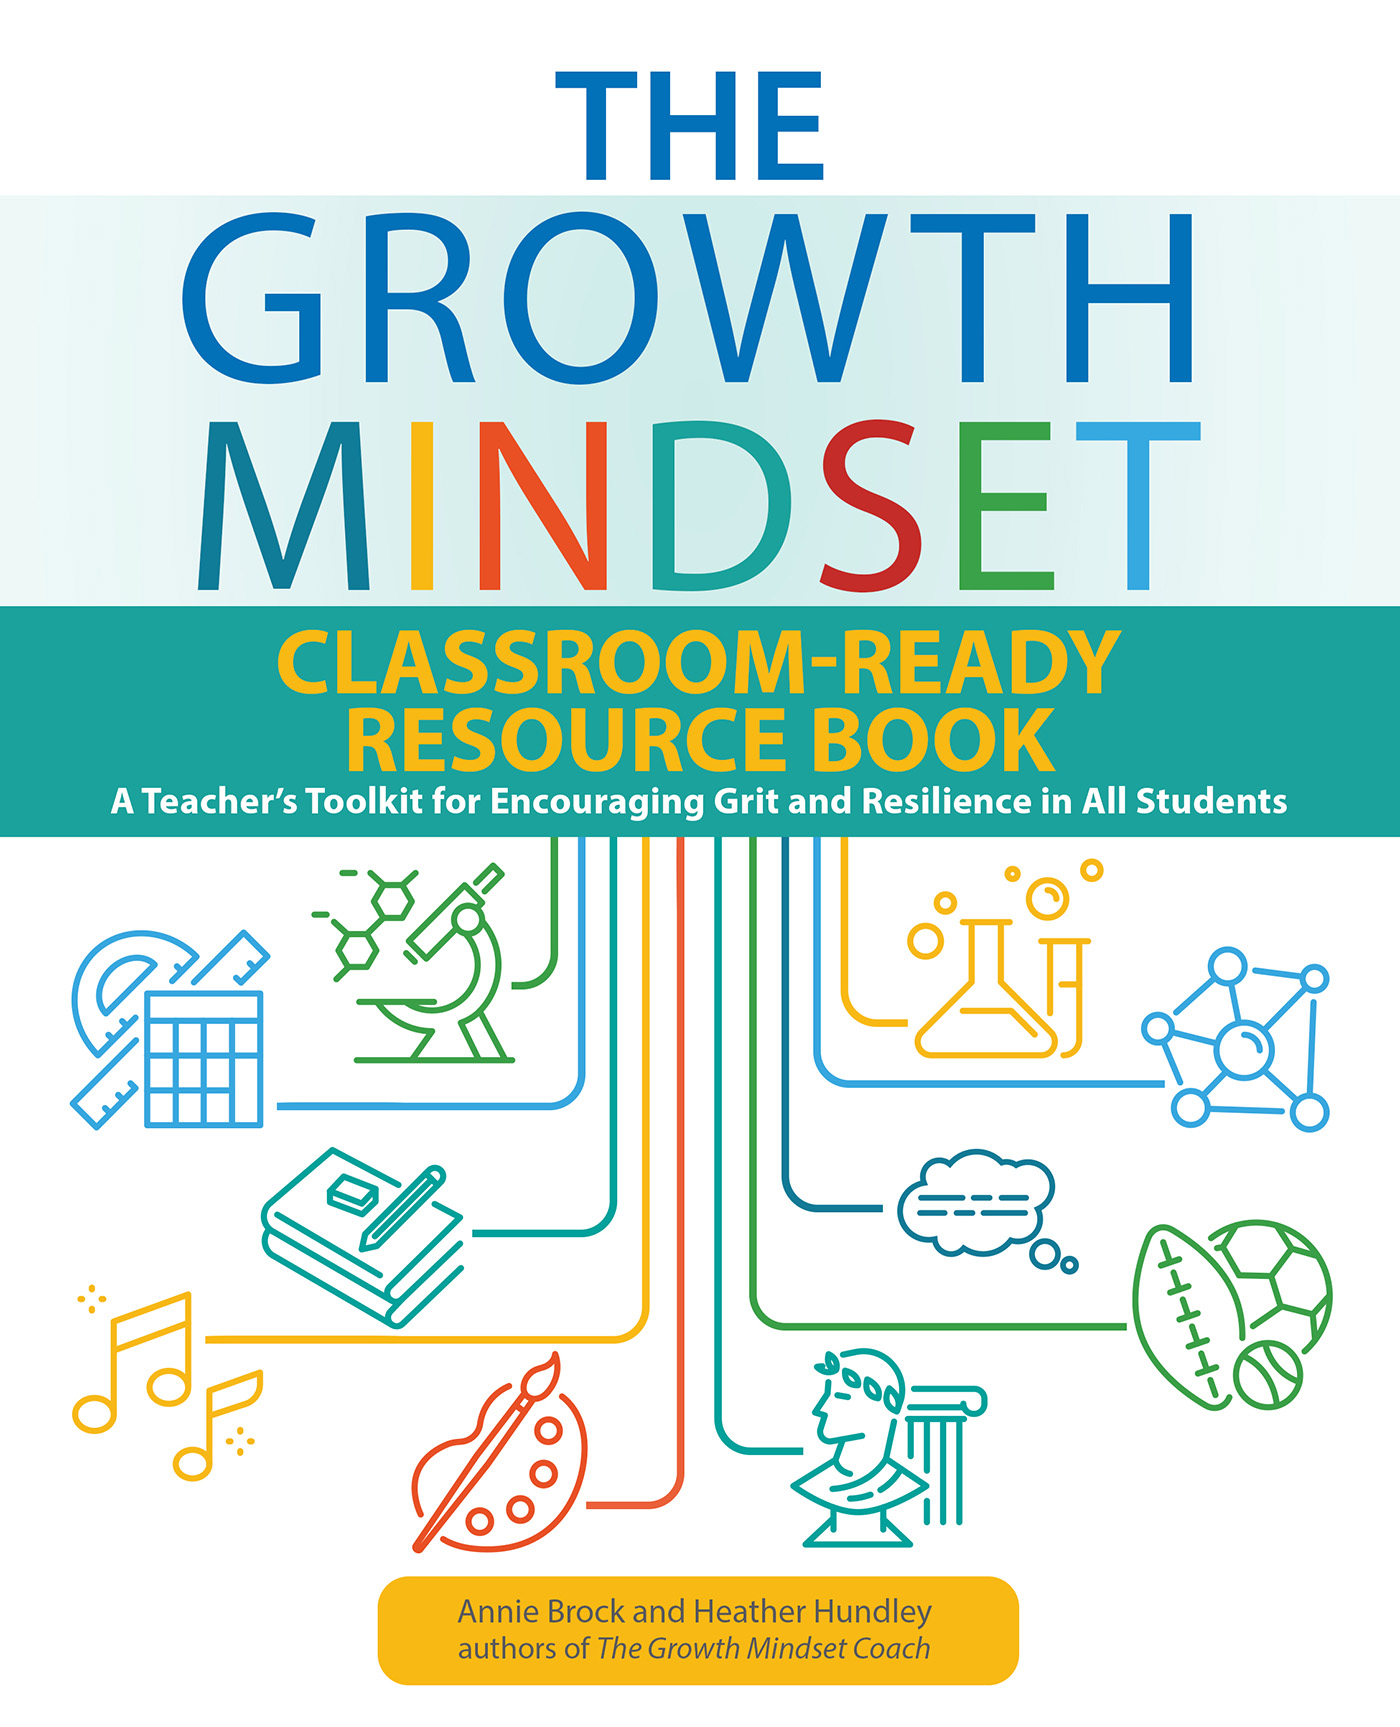 The Growth Mindset resource book image